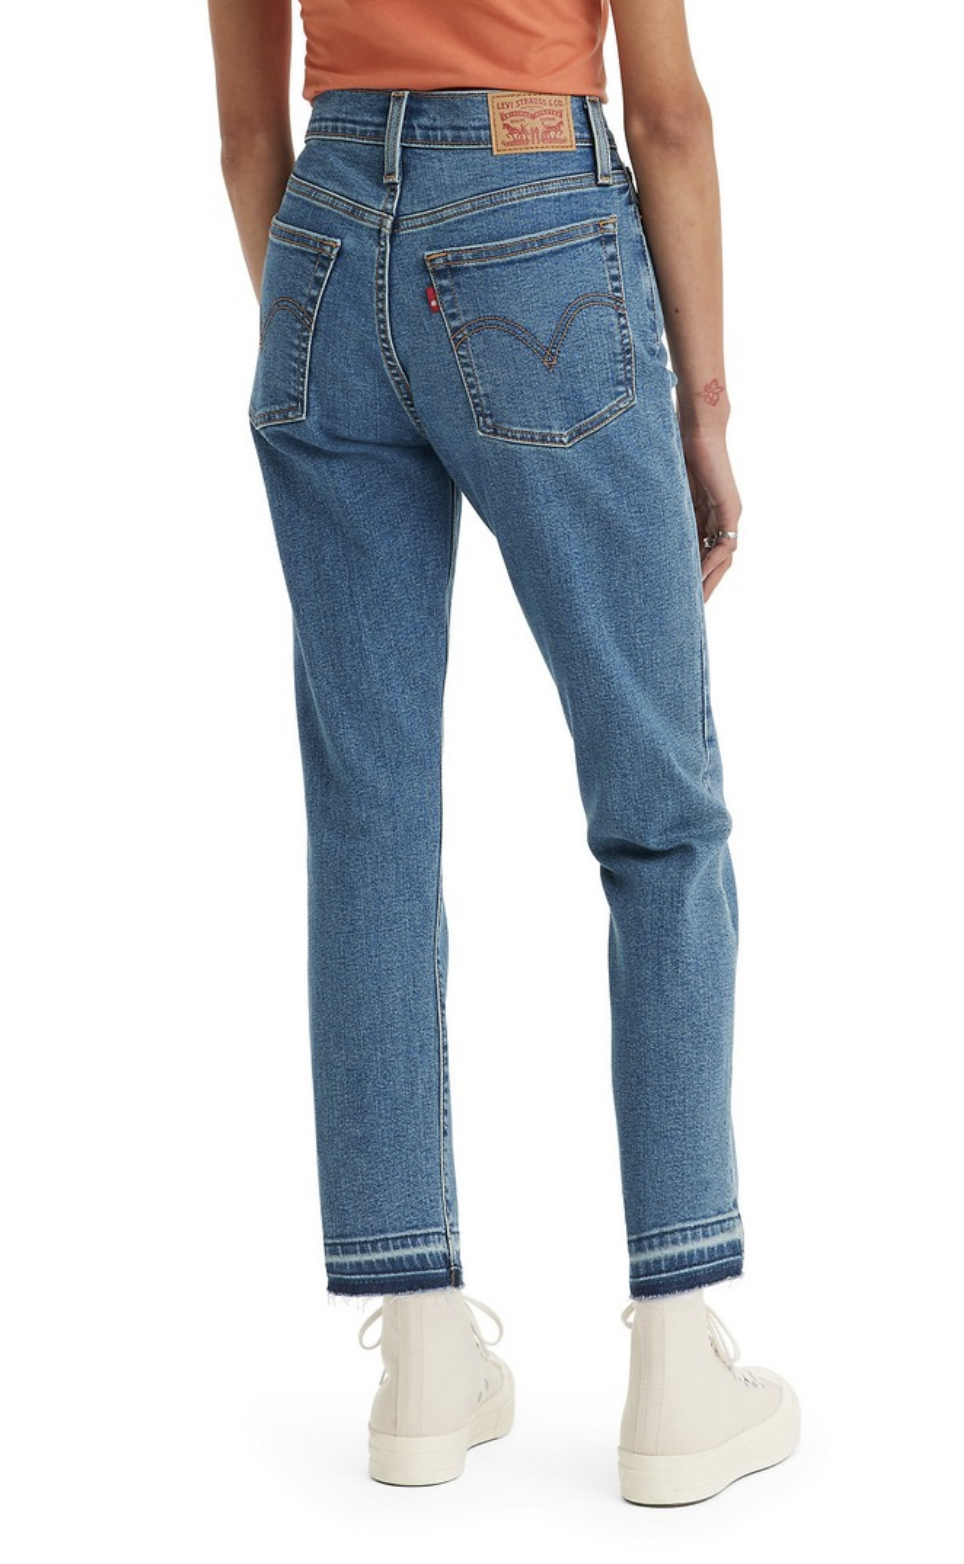 Levi Strauss & Co. Wedgie Straight, Turned On Me